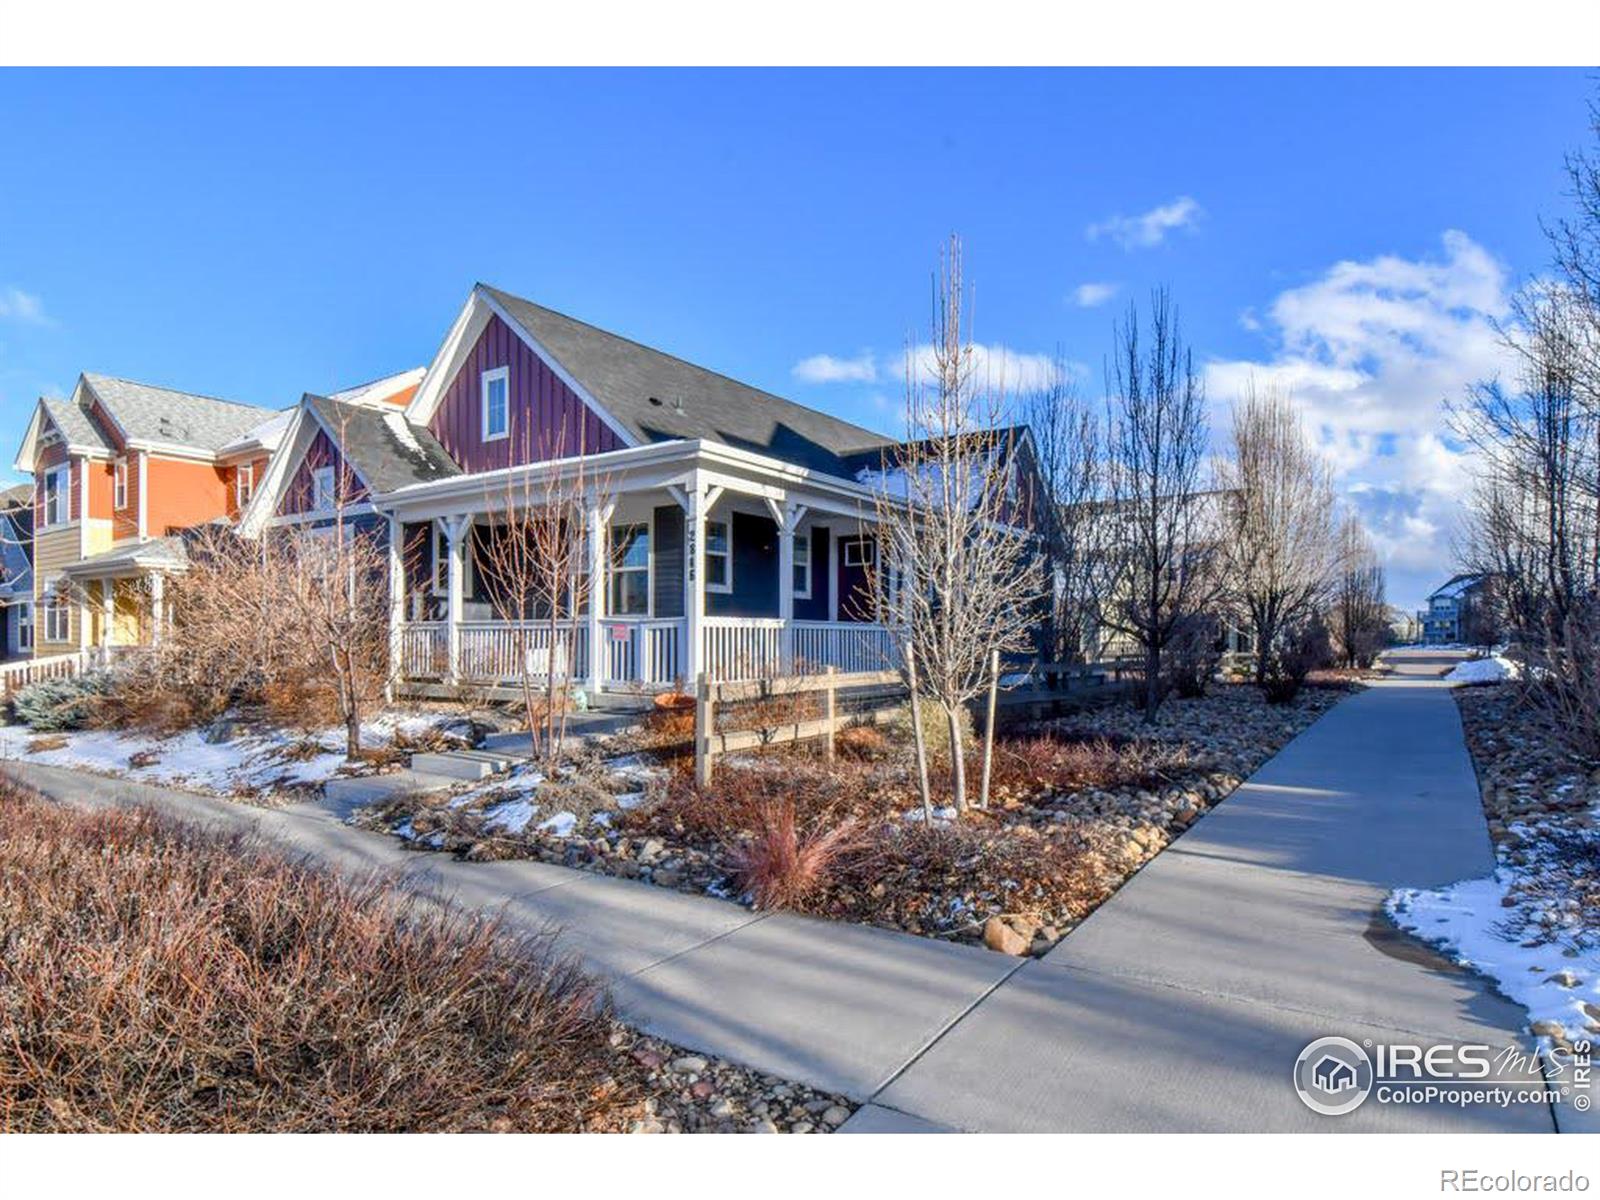 Report Image for 2846  Twin Lakes Circle,Lafayette, Colorado